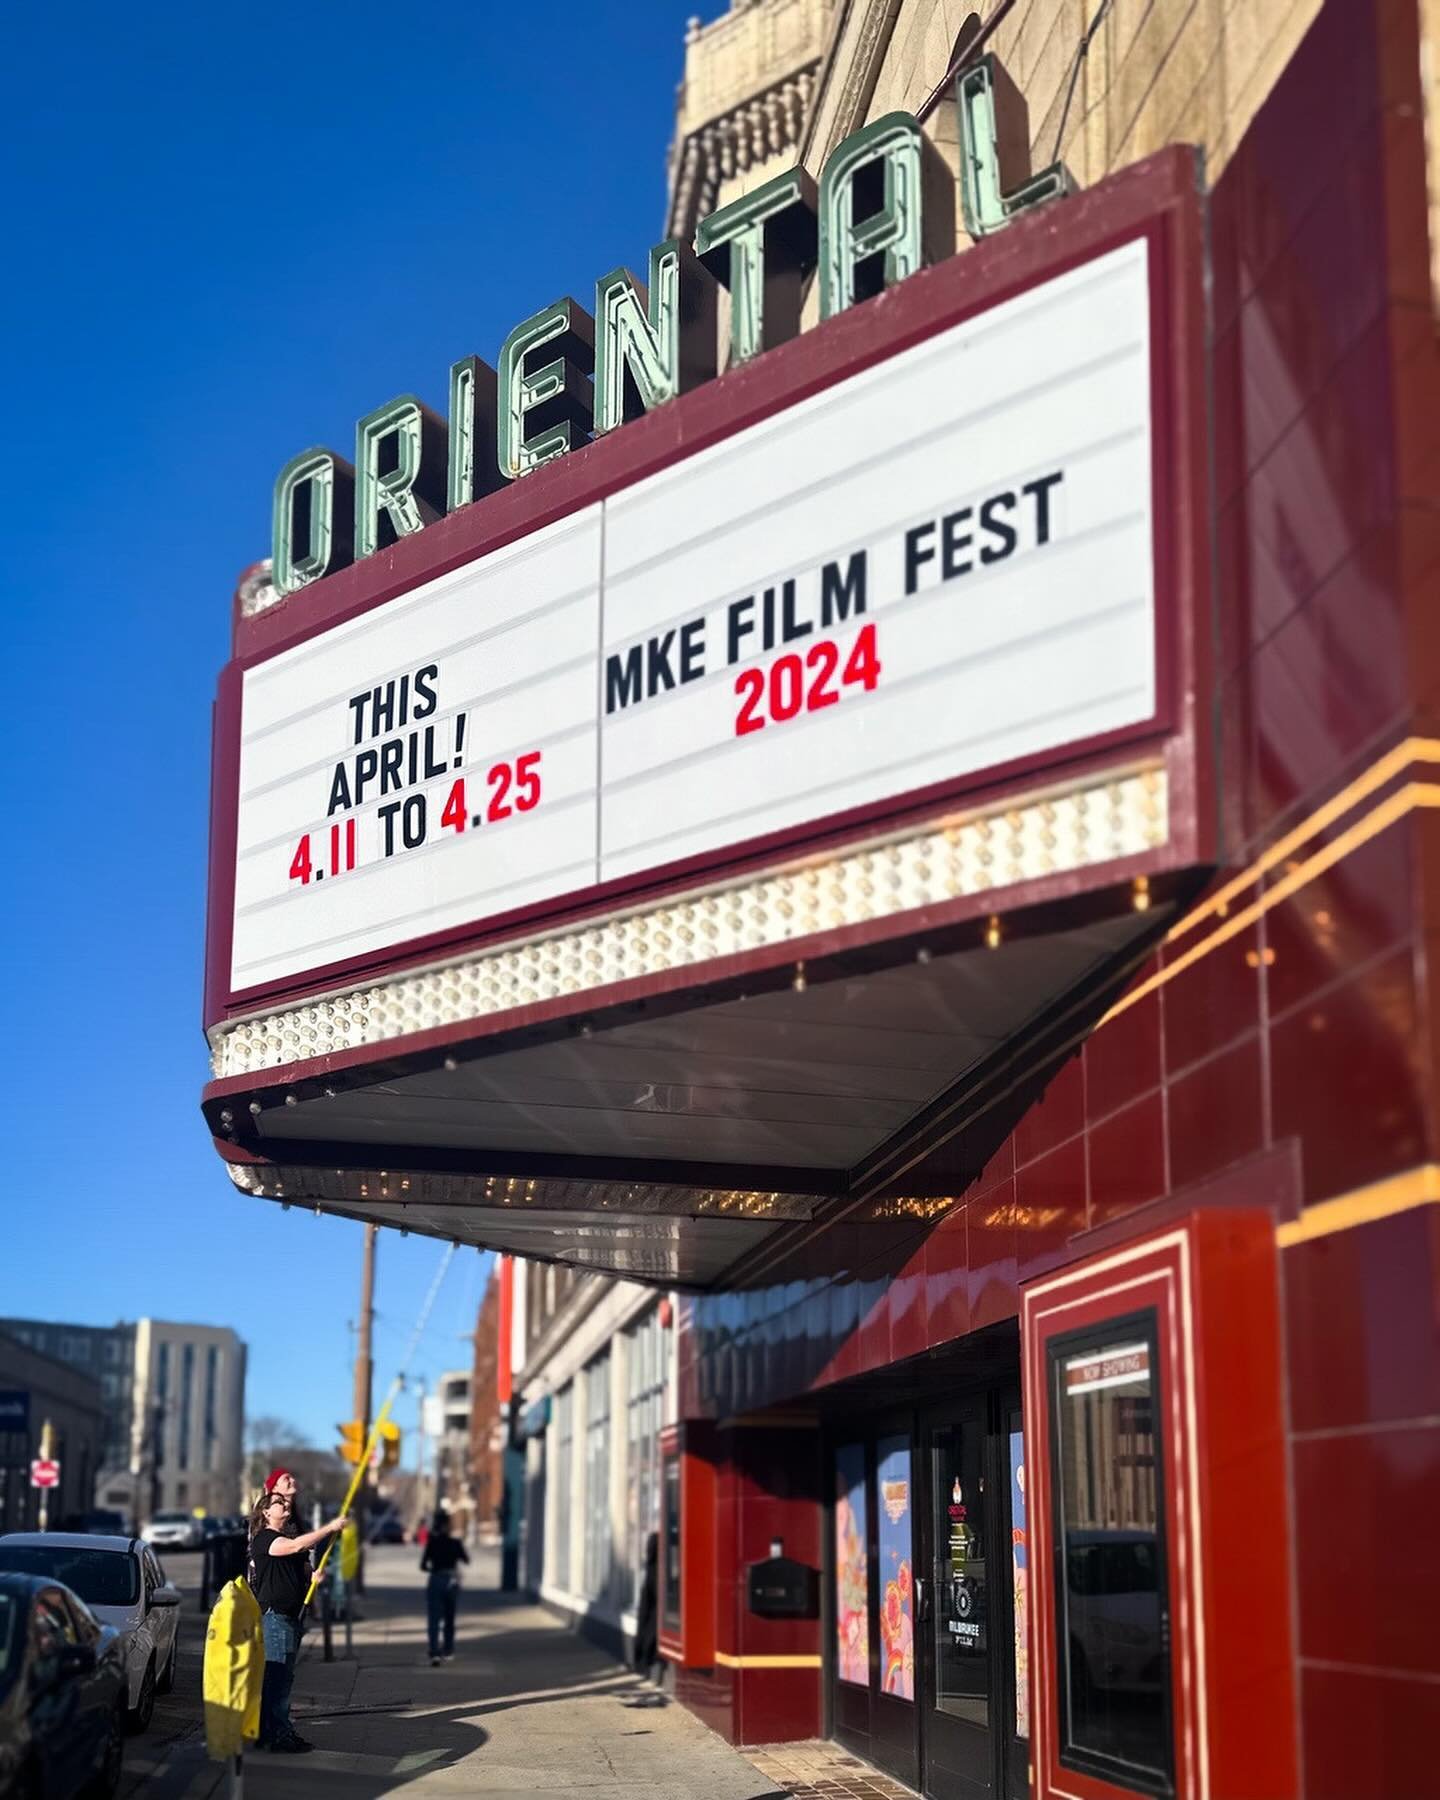 We are so lucky to be part of such a vibrant community! 
Here are some super cool things you should know about: 

🎞️ 2024 @mkefilm Film Festival! 
started today, with showings at Oriental, Downer, &amp; Avalon Theatre, as well as Times Cinema
📻 Sof